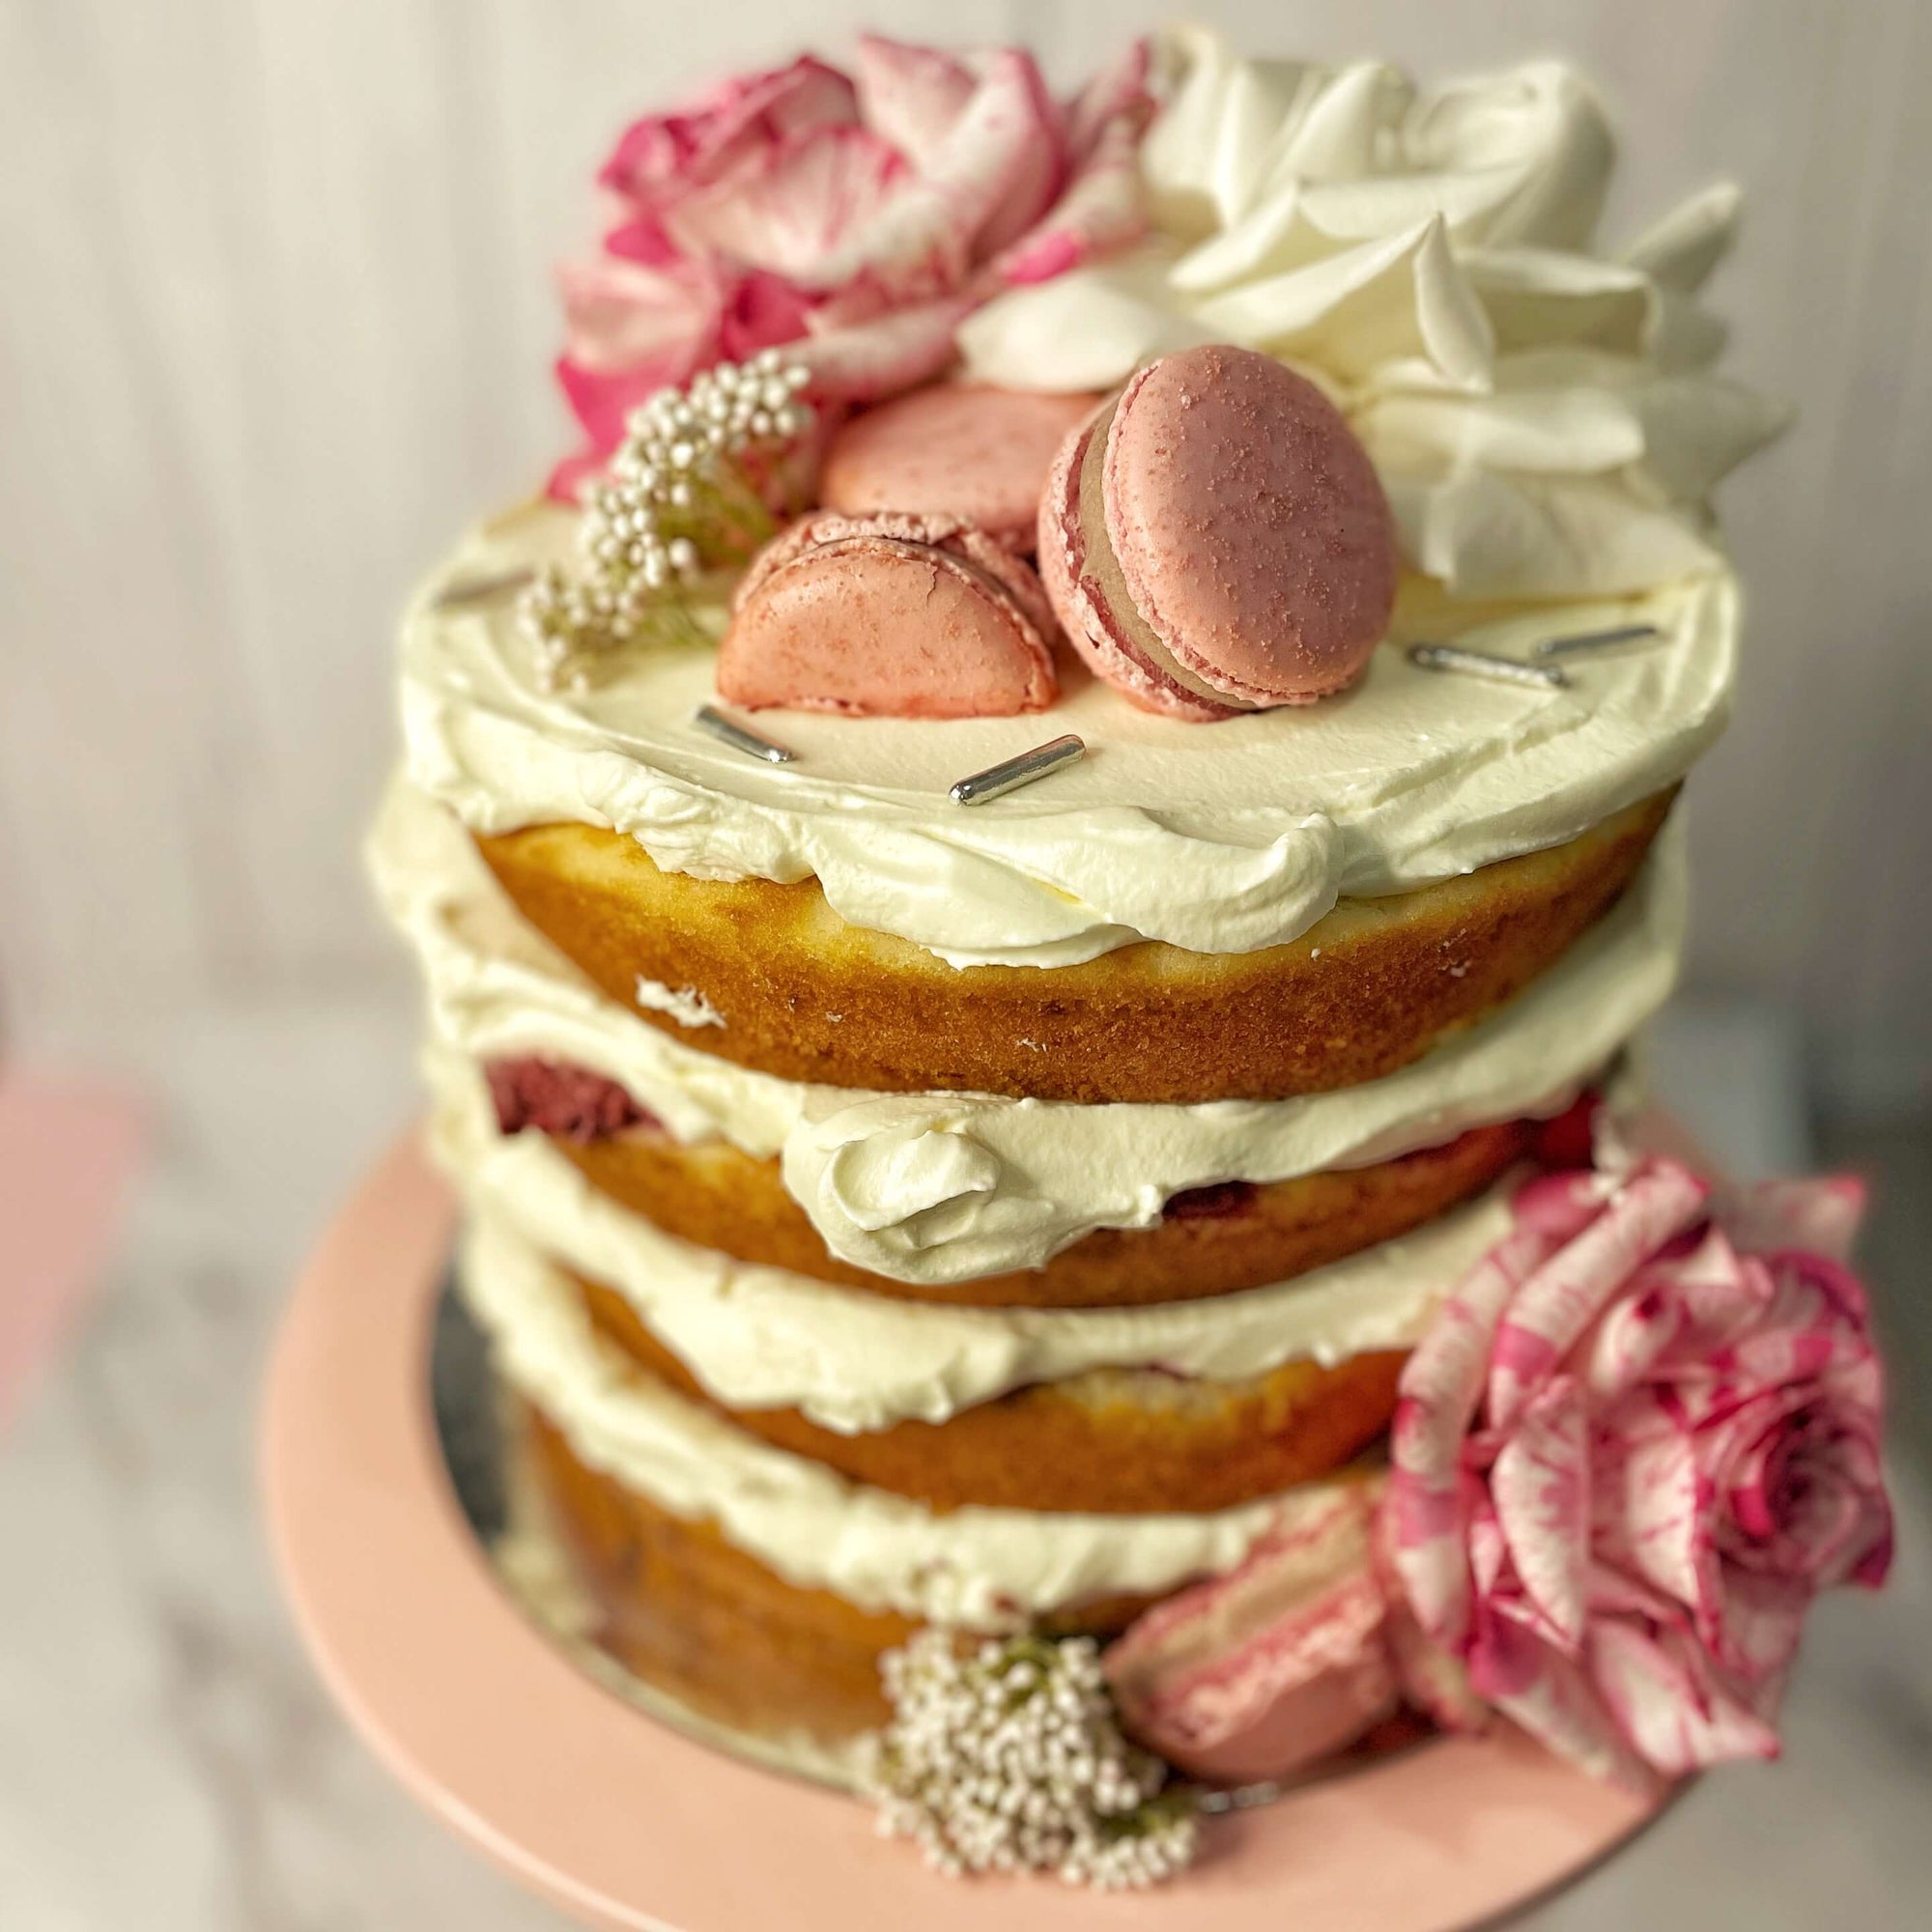 Naked Victoria Sponge Cake with fresh flowers